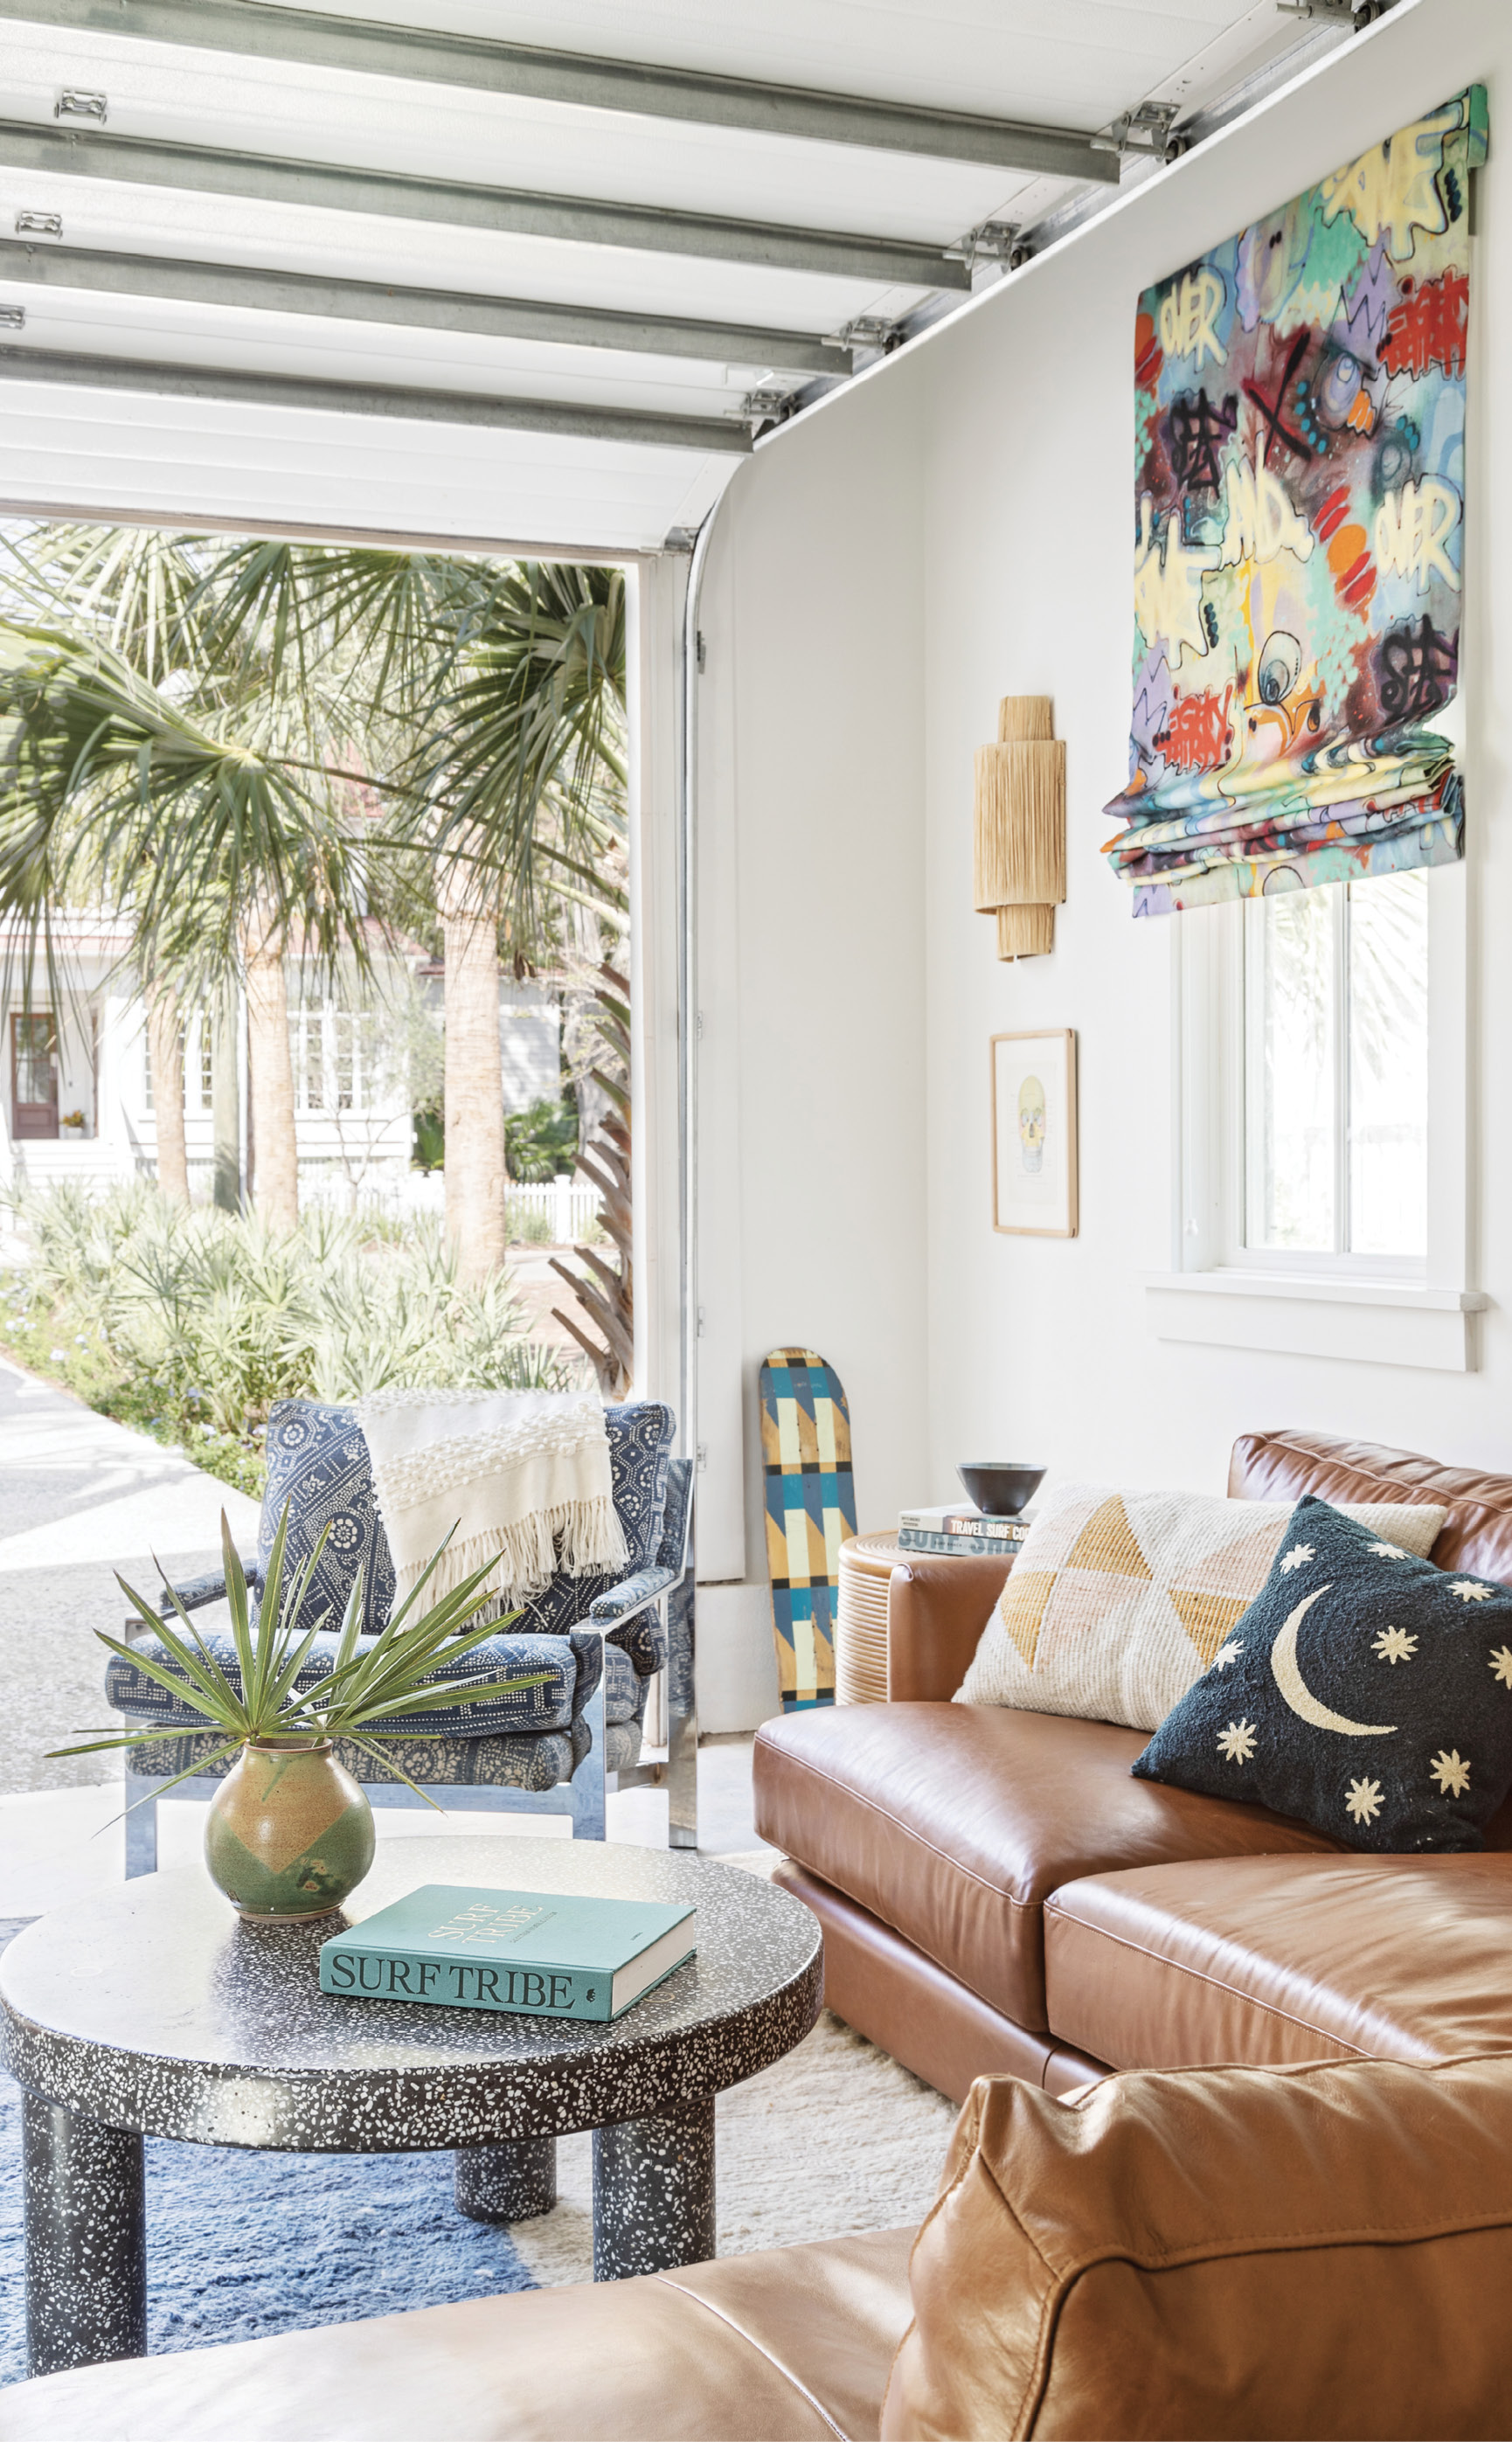 Teen Scene: Stone and leather (in the form of a terrazzo coffee table from Anthropologie and sofa from West Elm) are durable yet great-looking choices for the garage-turned-kids’ hang space.